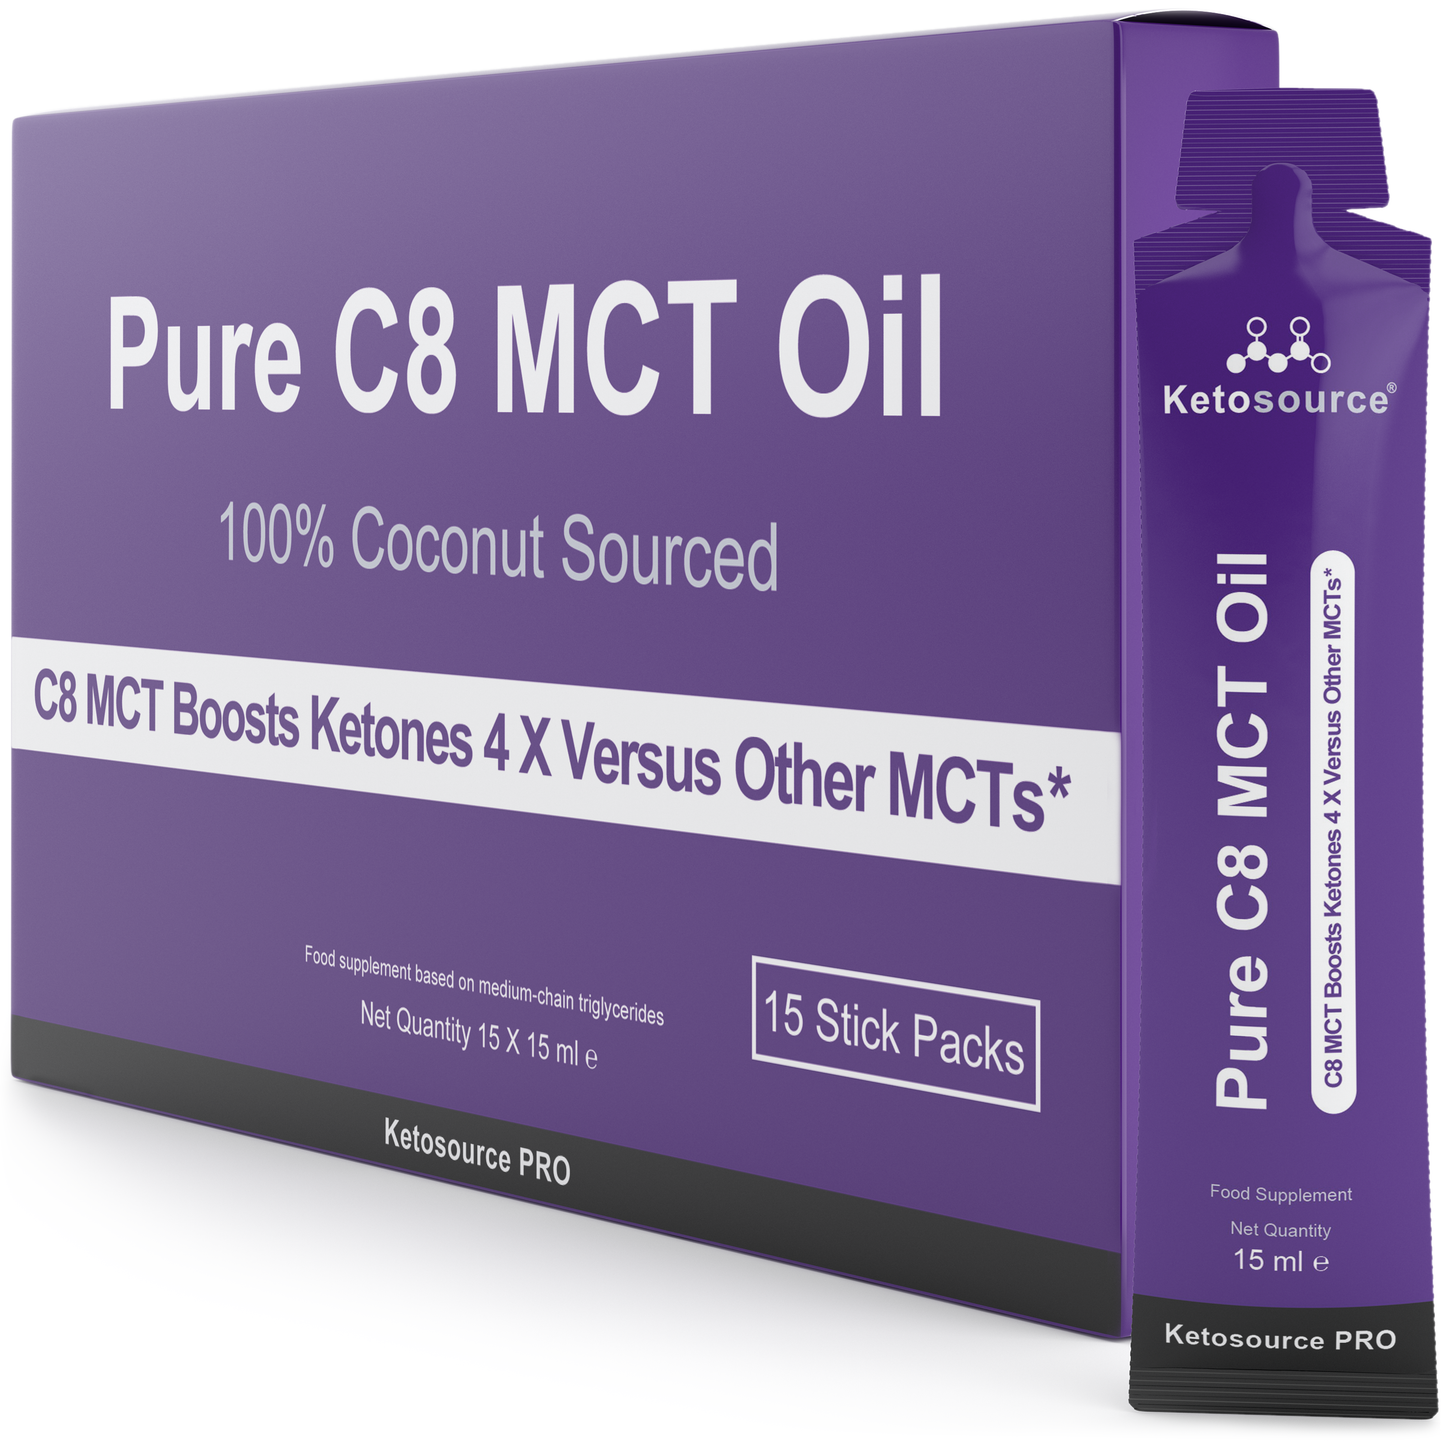 Aceite Ketosource Pure C8 MCT